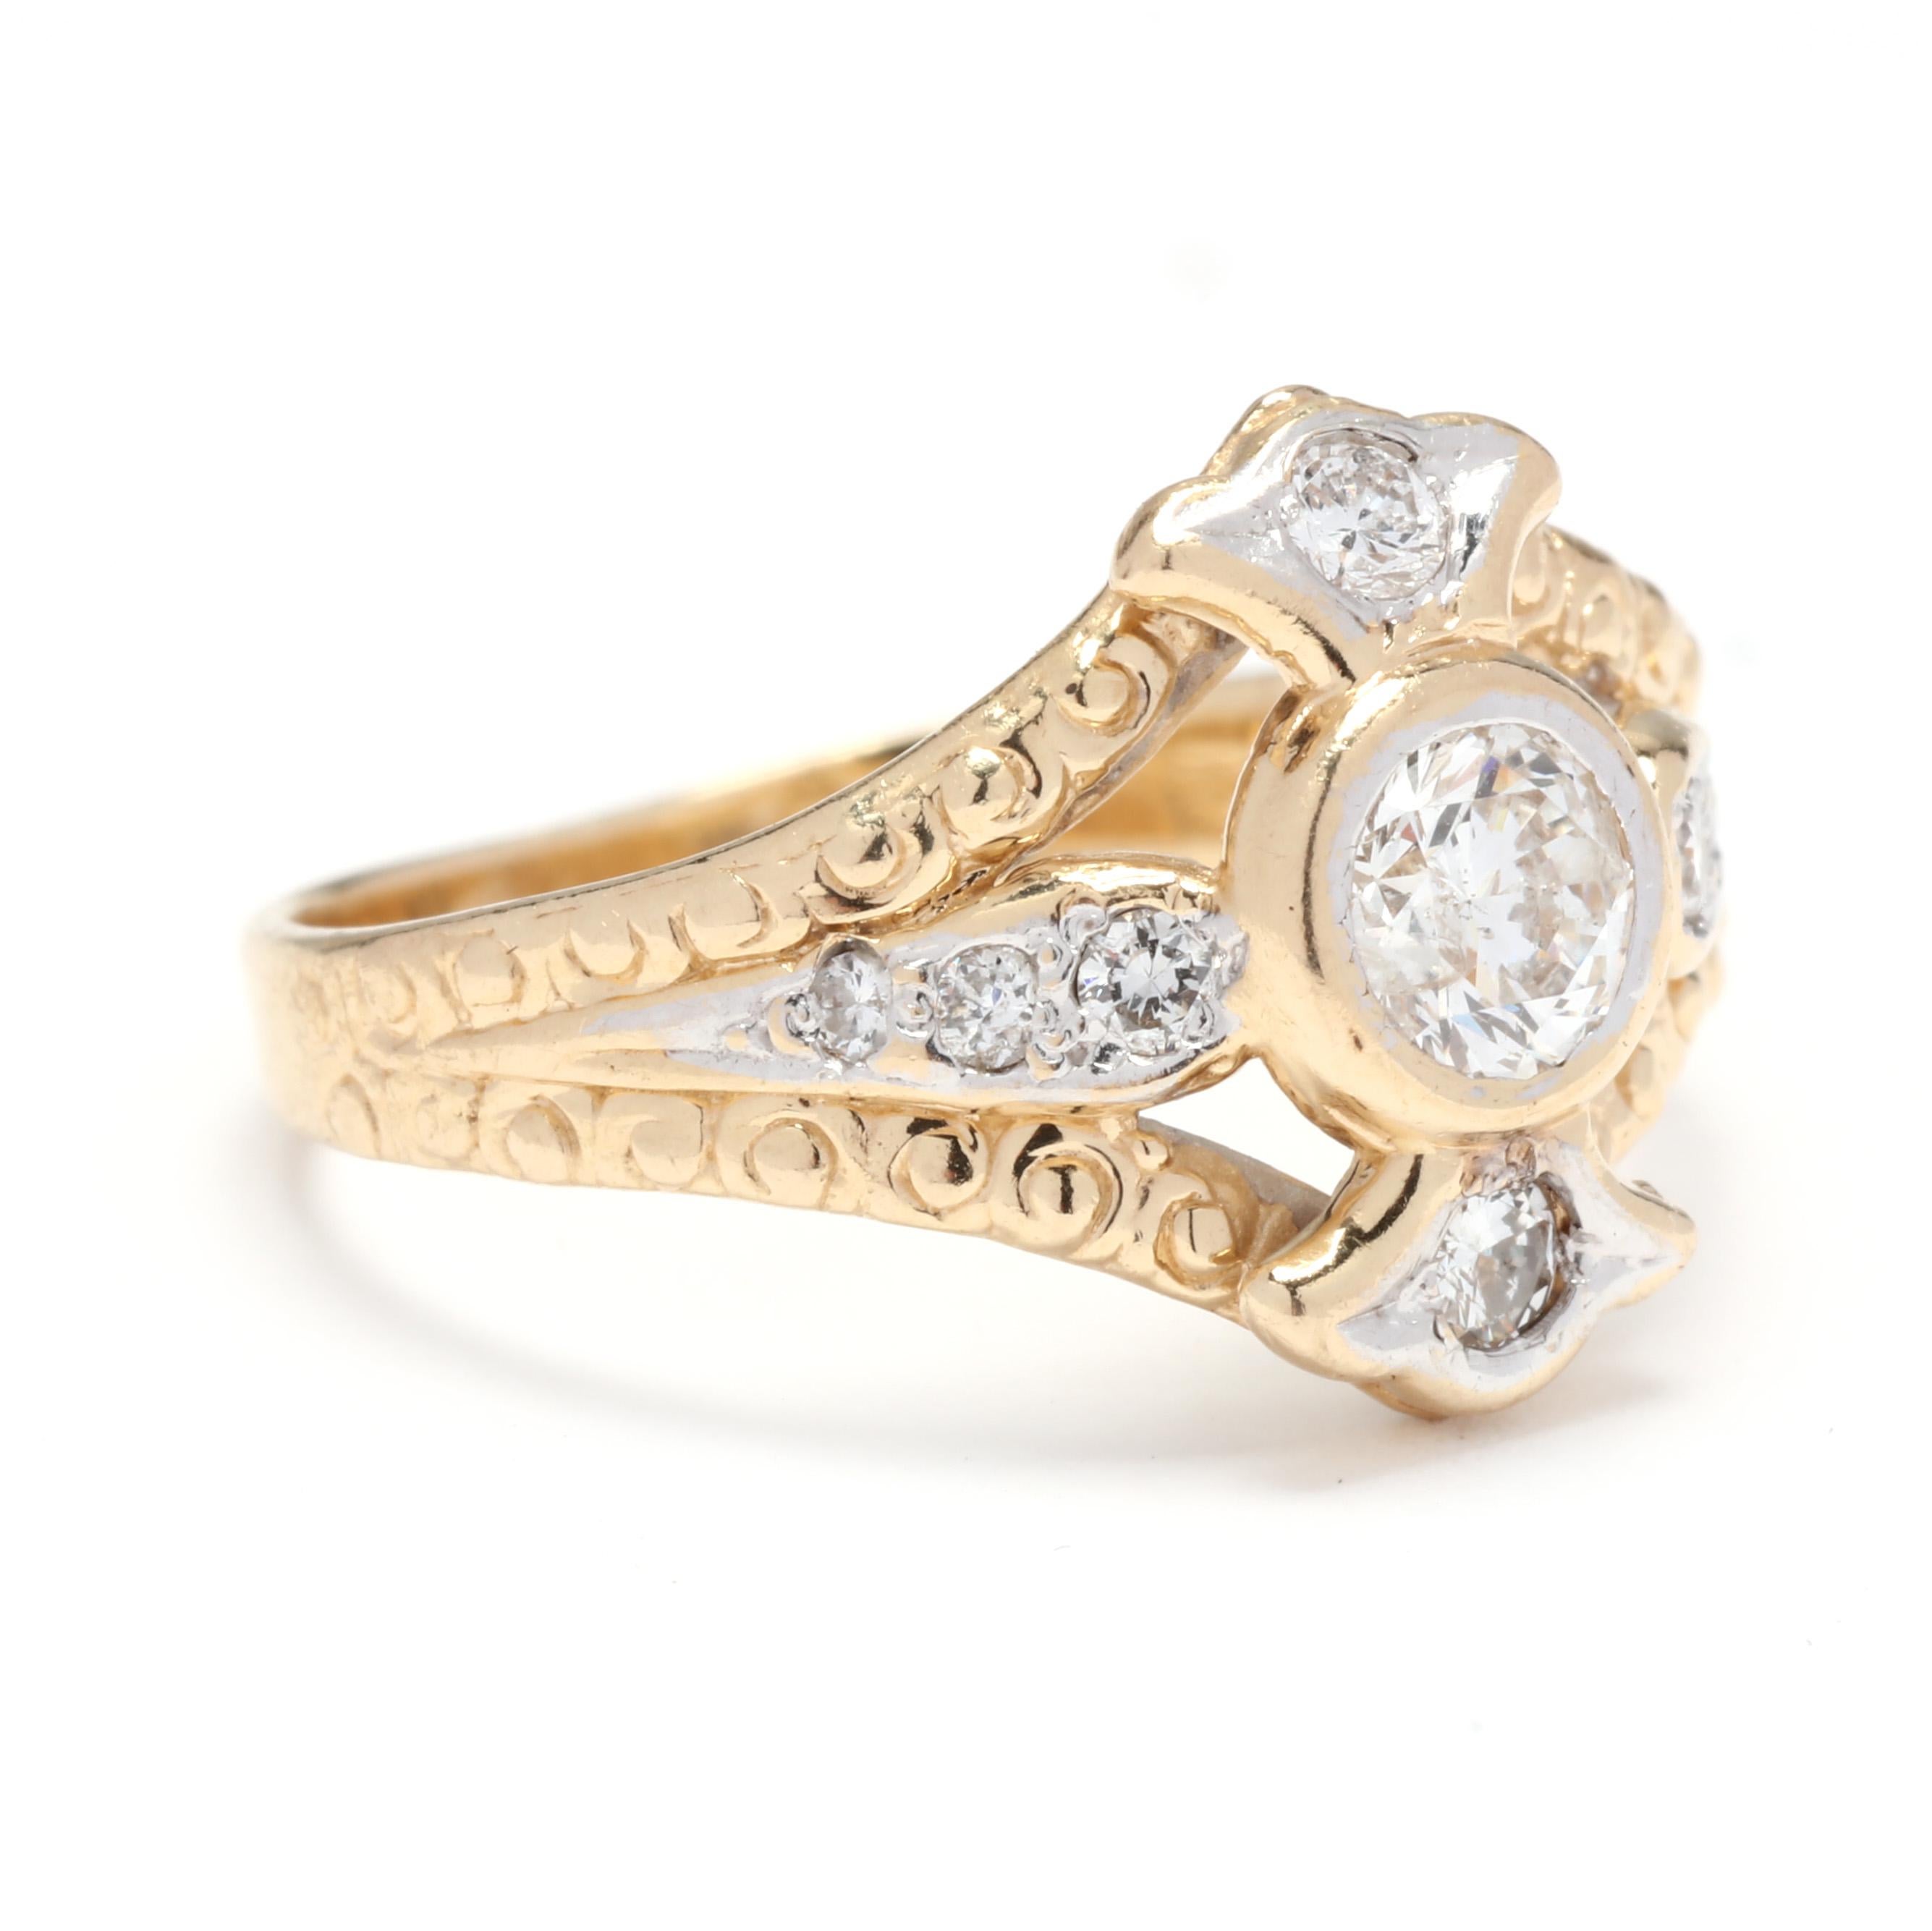 A vintage 14 karat yellow gold diamond swirl ring. This everyday diamond ring features a tapered design with a bezel set round brilliant cut diamond weighing approximately .36 carat in the center with a round brilliant cut diamond to the top, bottom